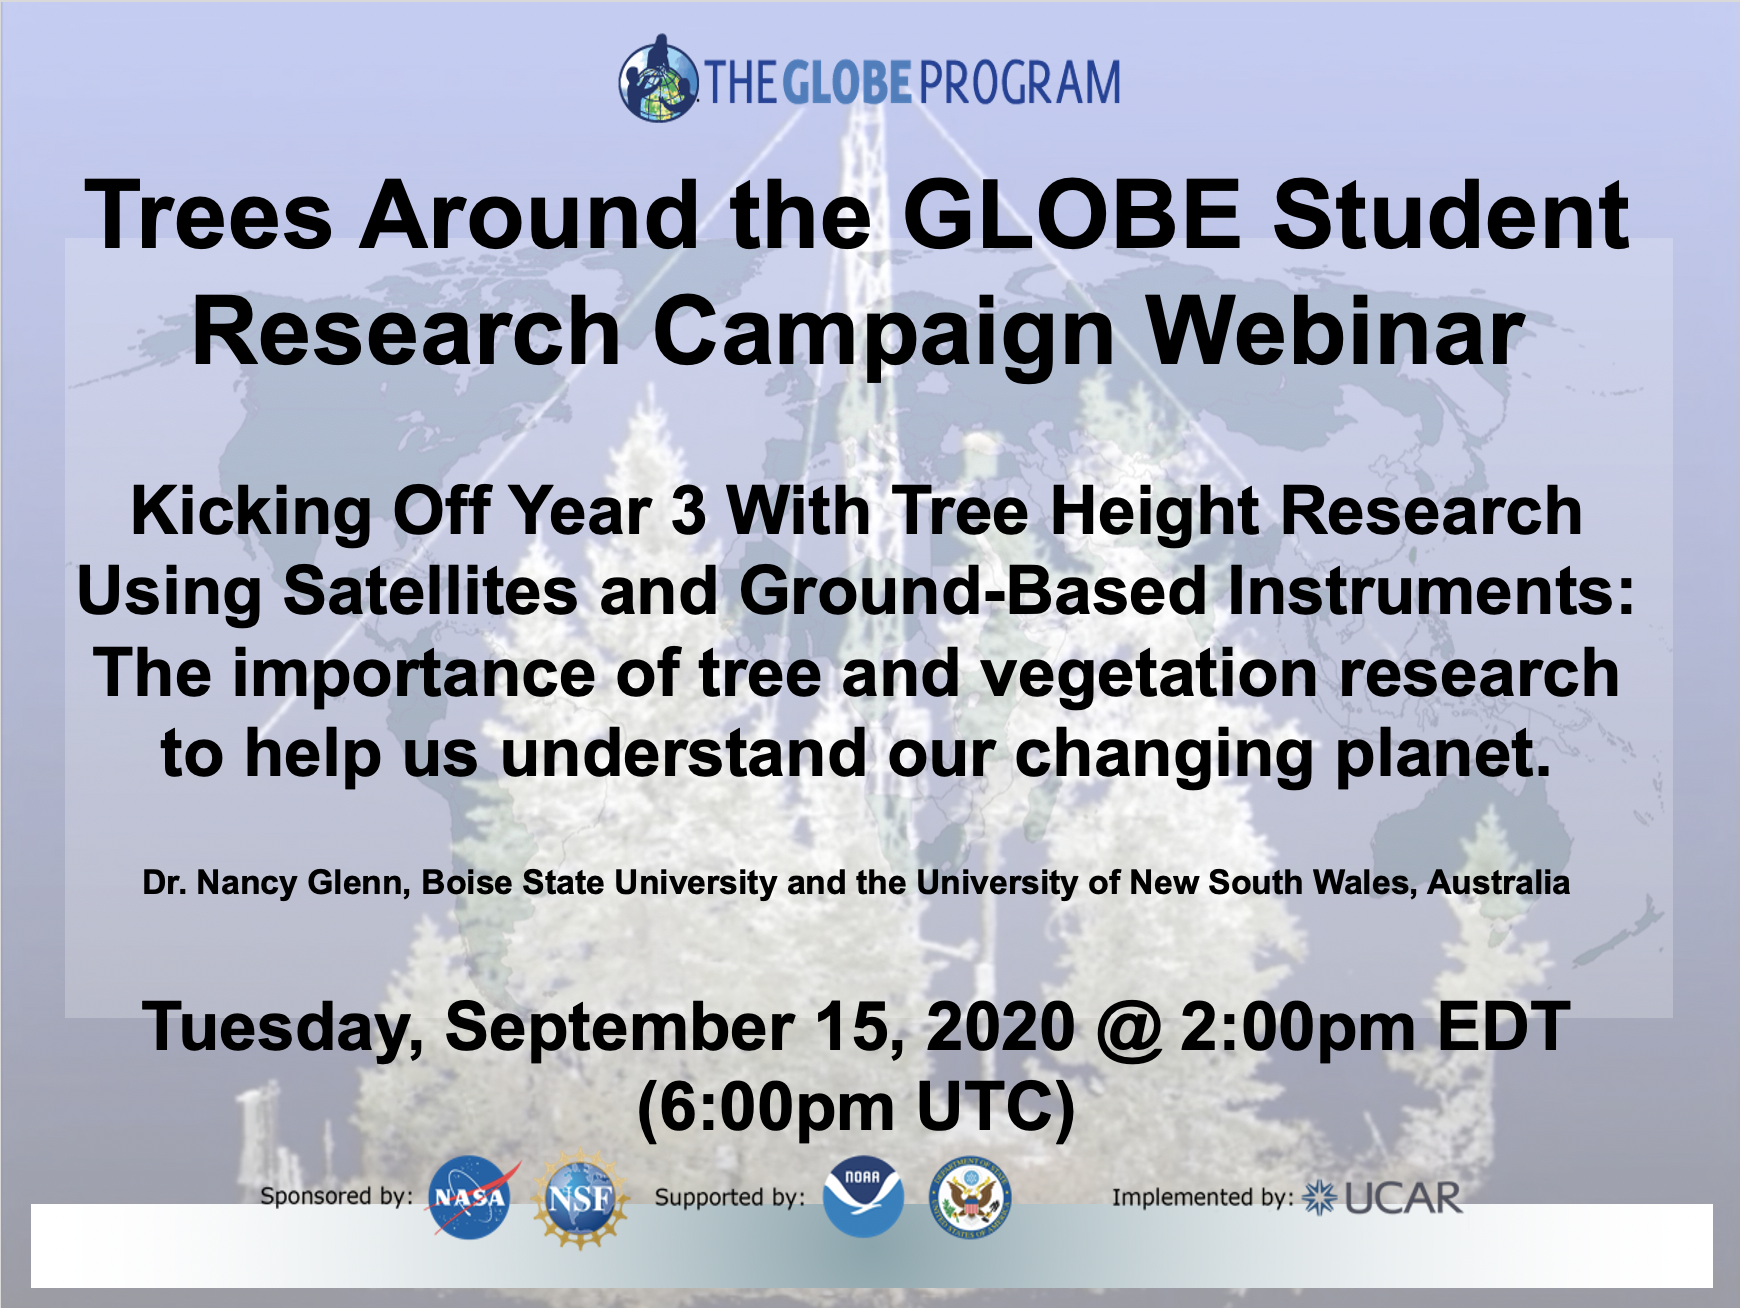 Trees Around the GLOBE Student Research Campaign Webinar Shareable